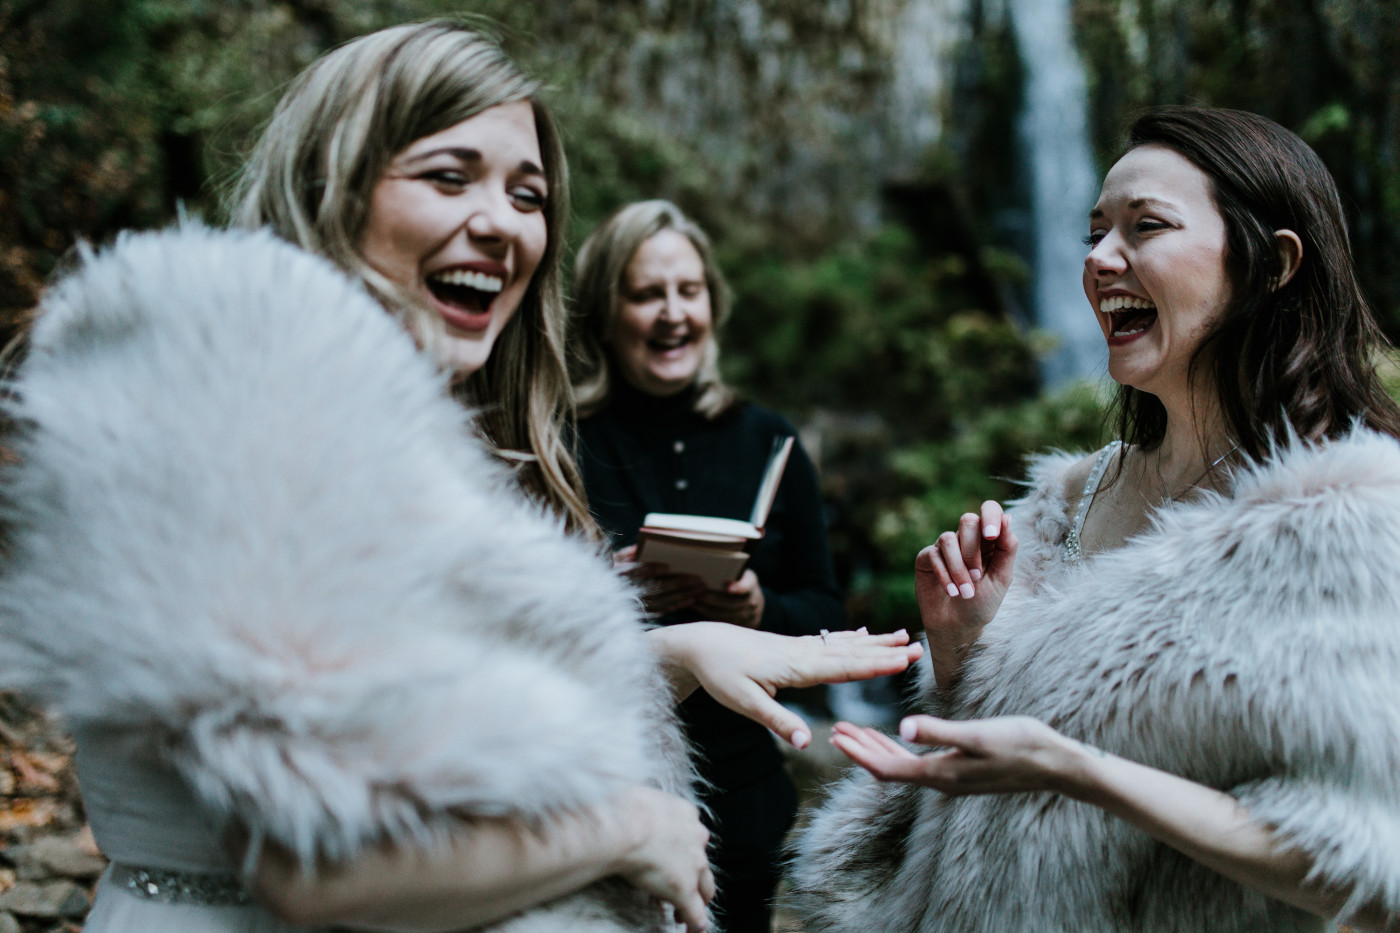 Hayley and Tiffany laugh during their elopement. Elopement photography at the Columbia River Gorge by Sienna Plus Josh.